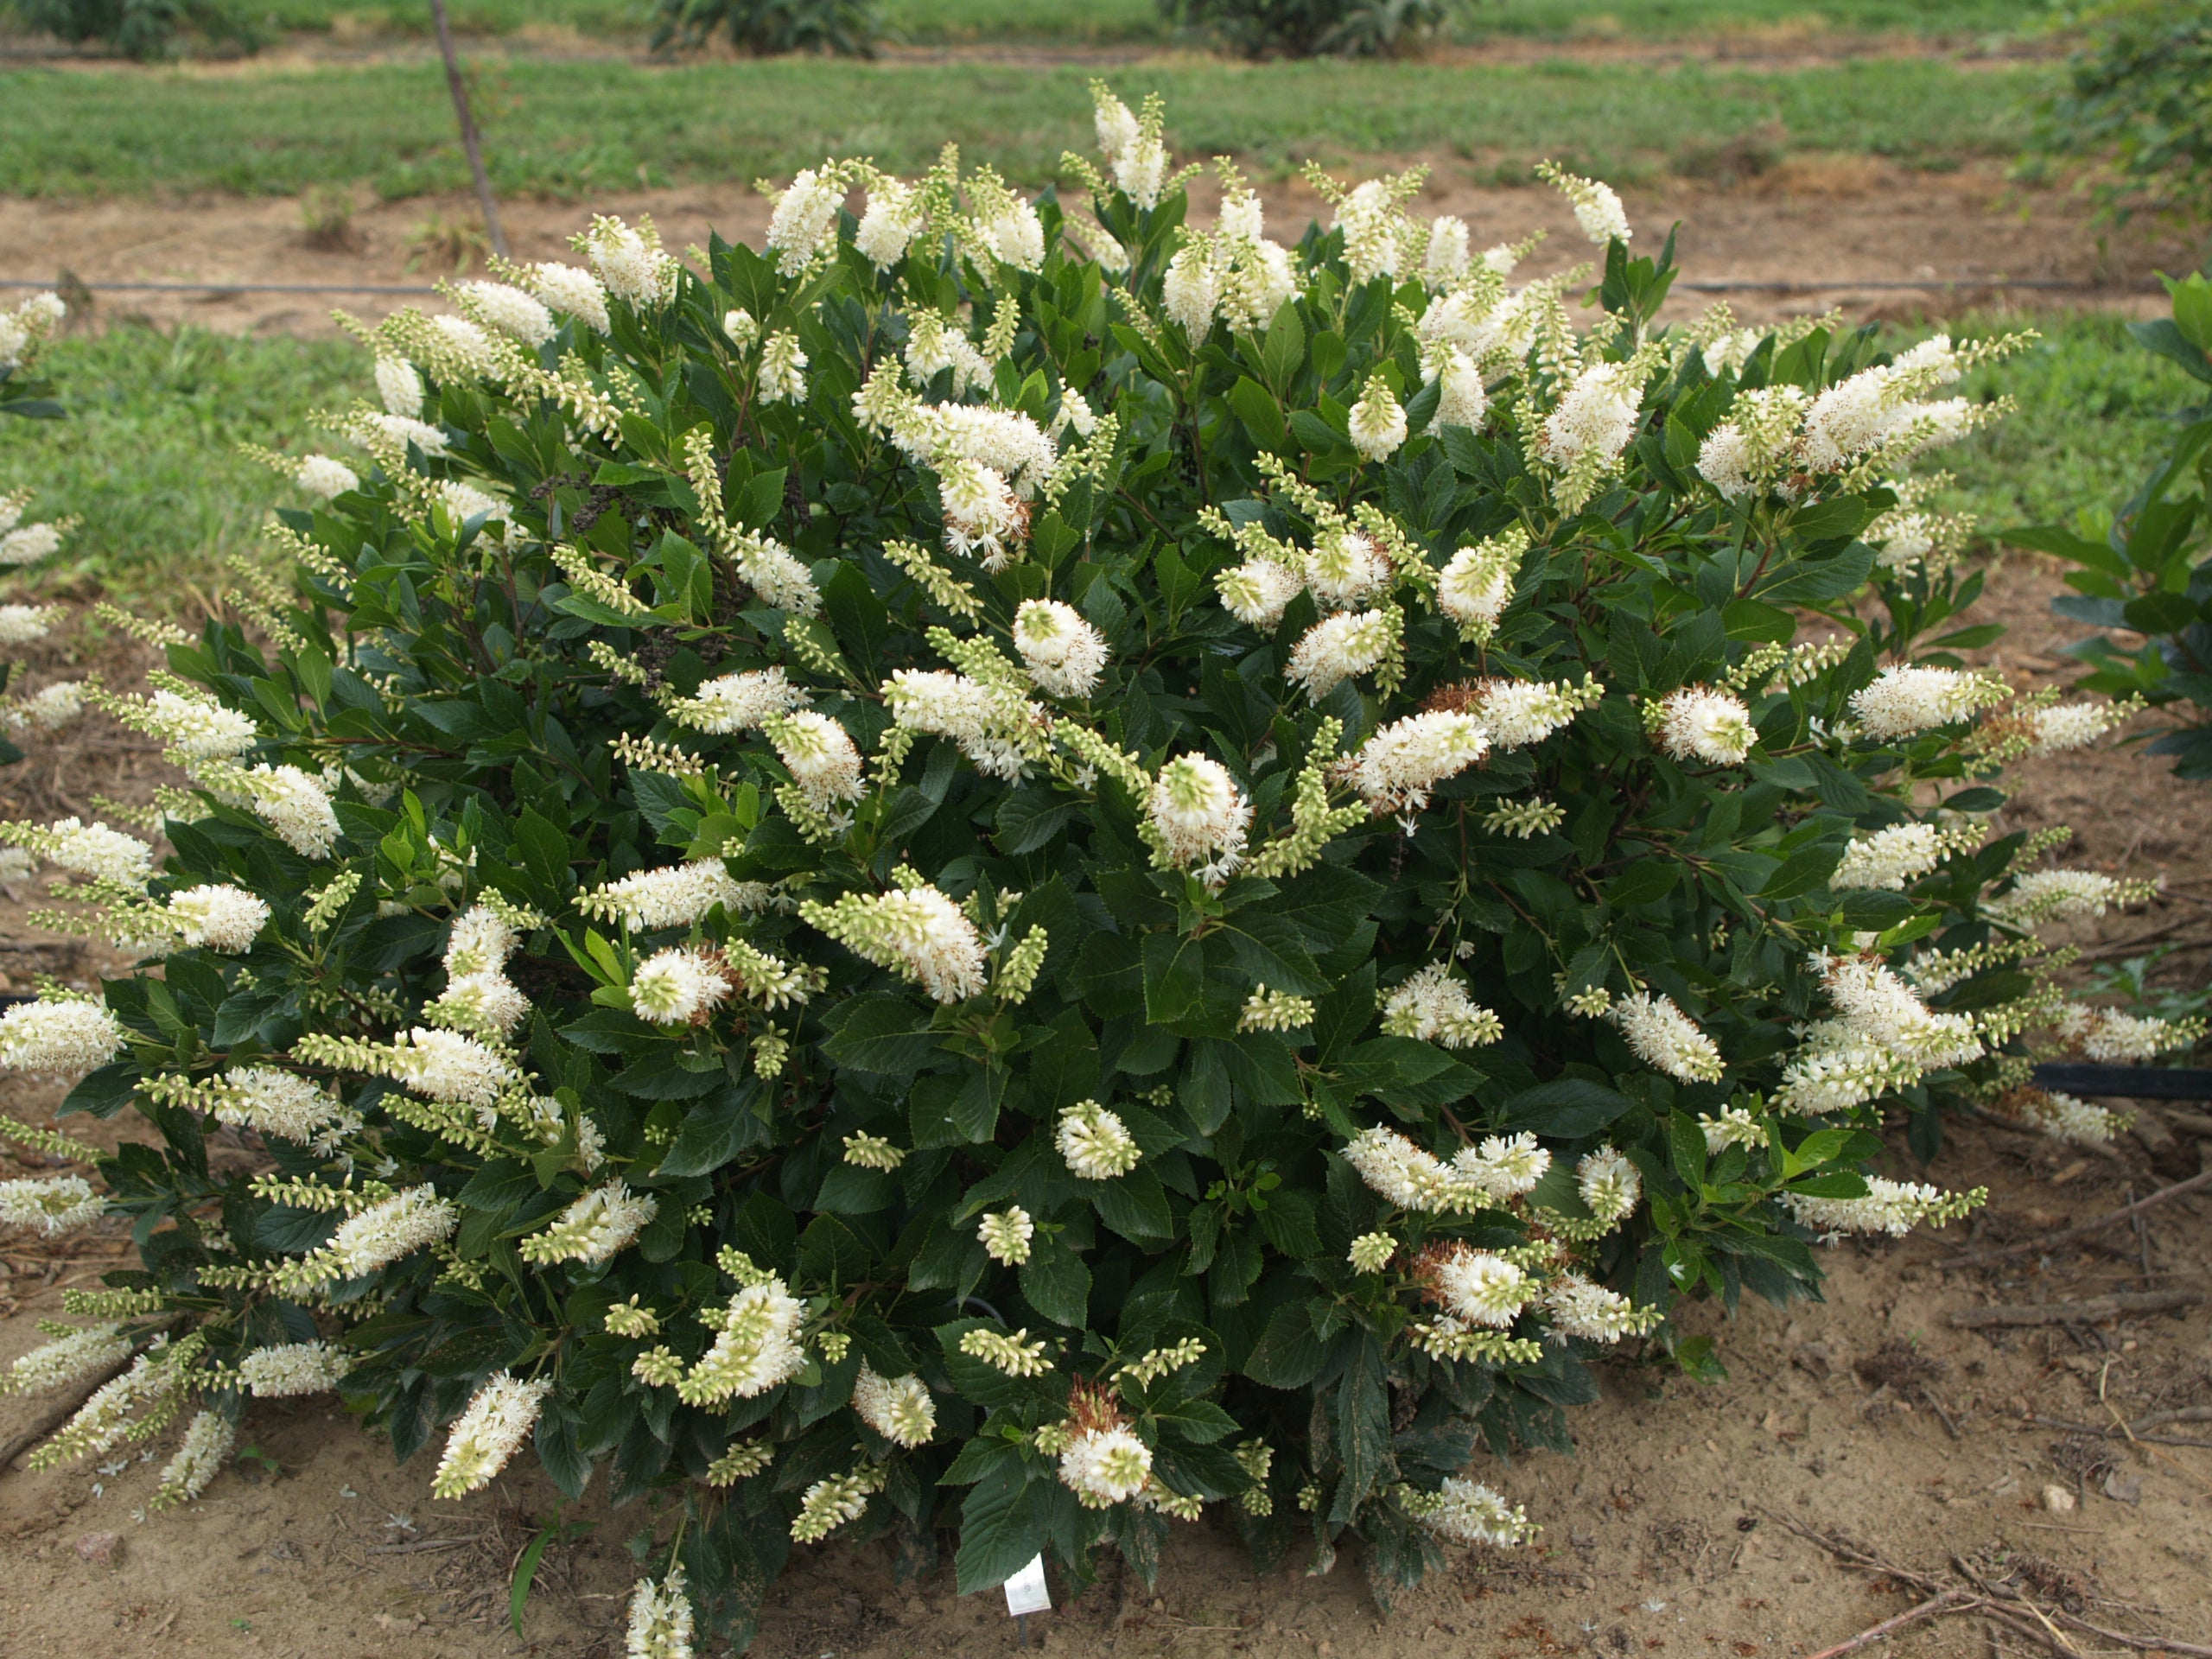 Clethra Sugartina Crystalina has white flowers with a delicious scent